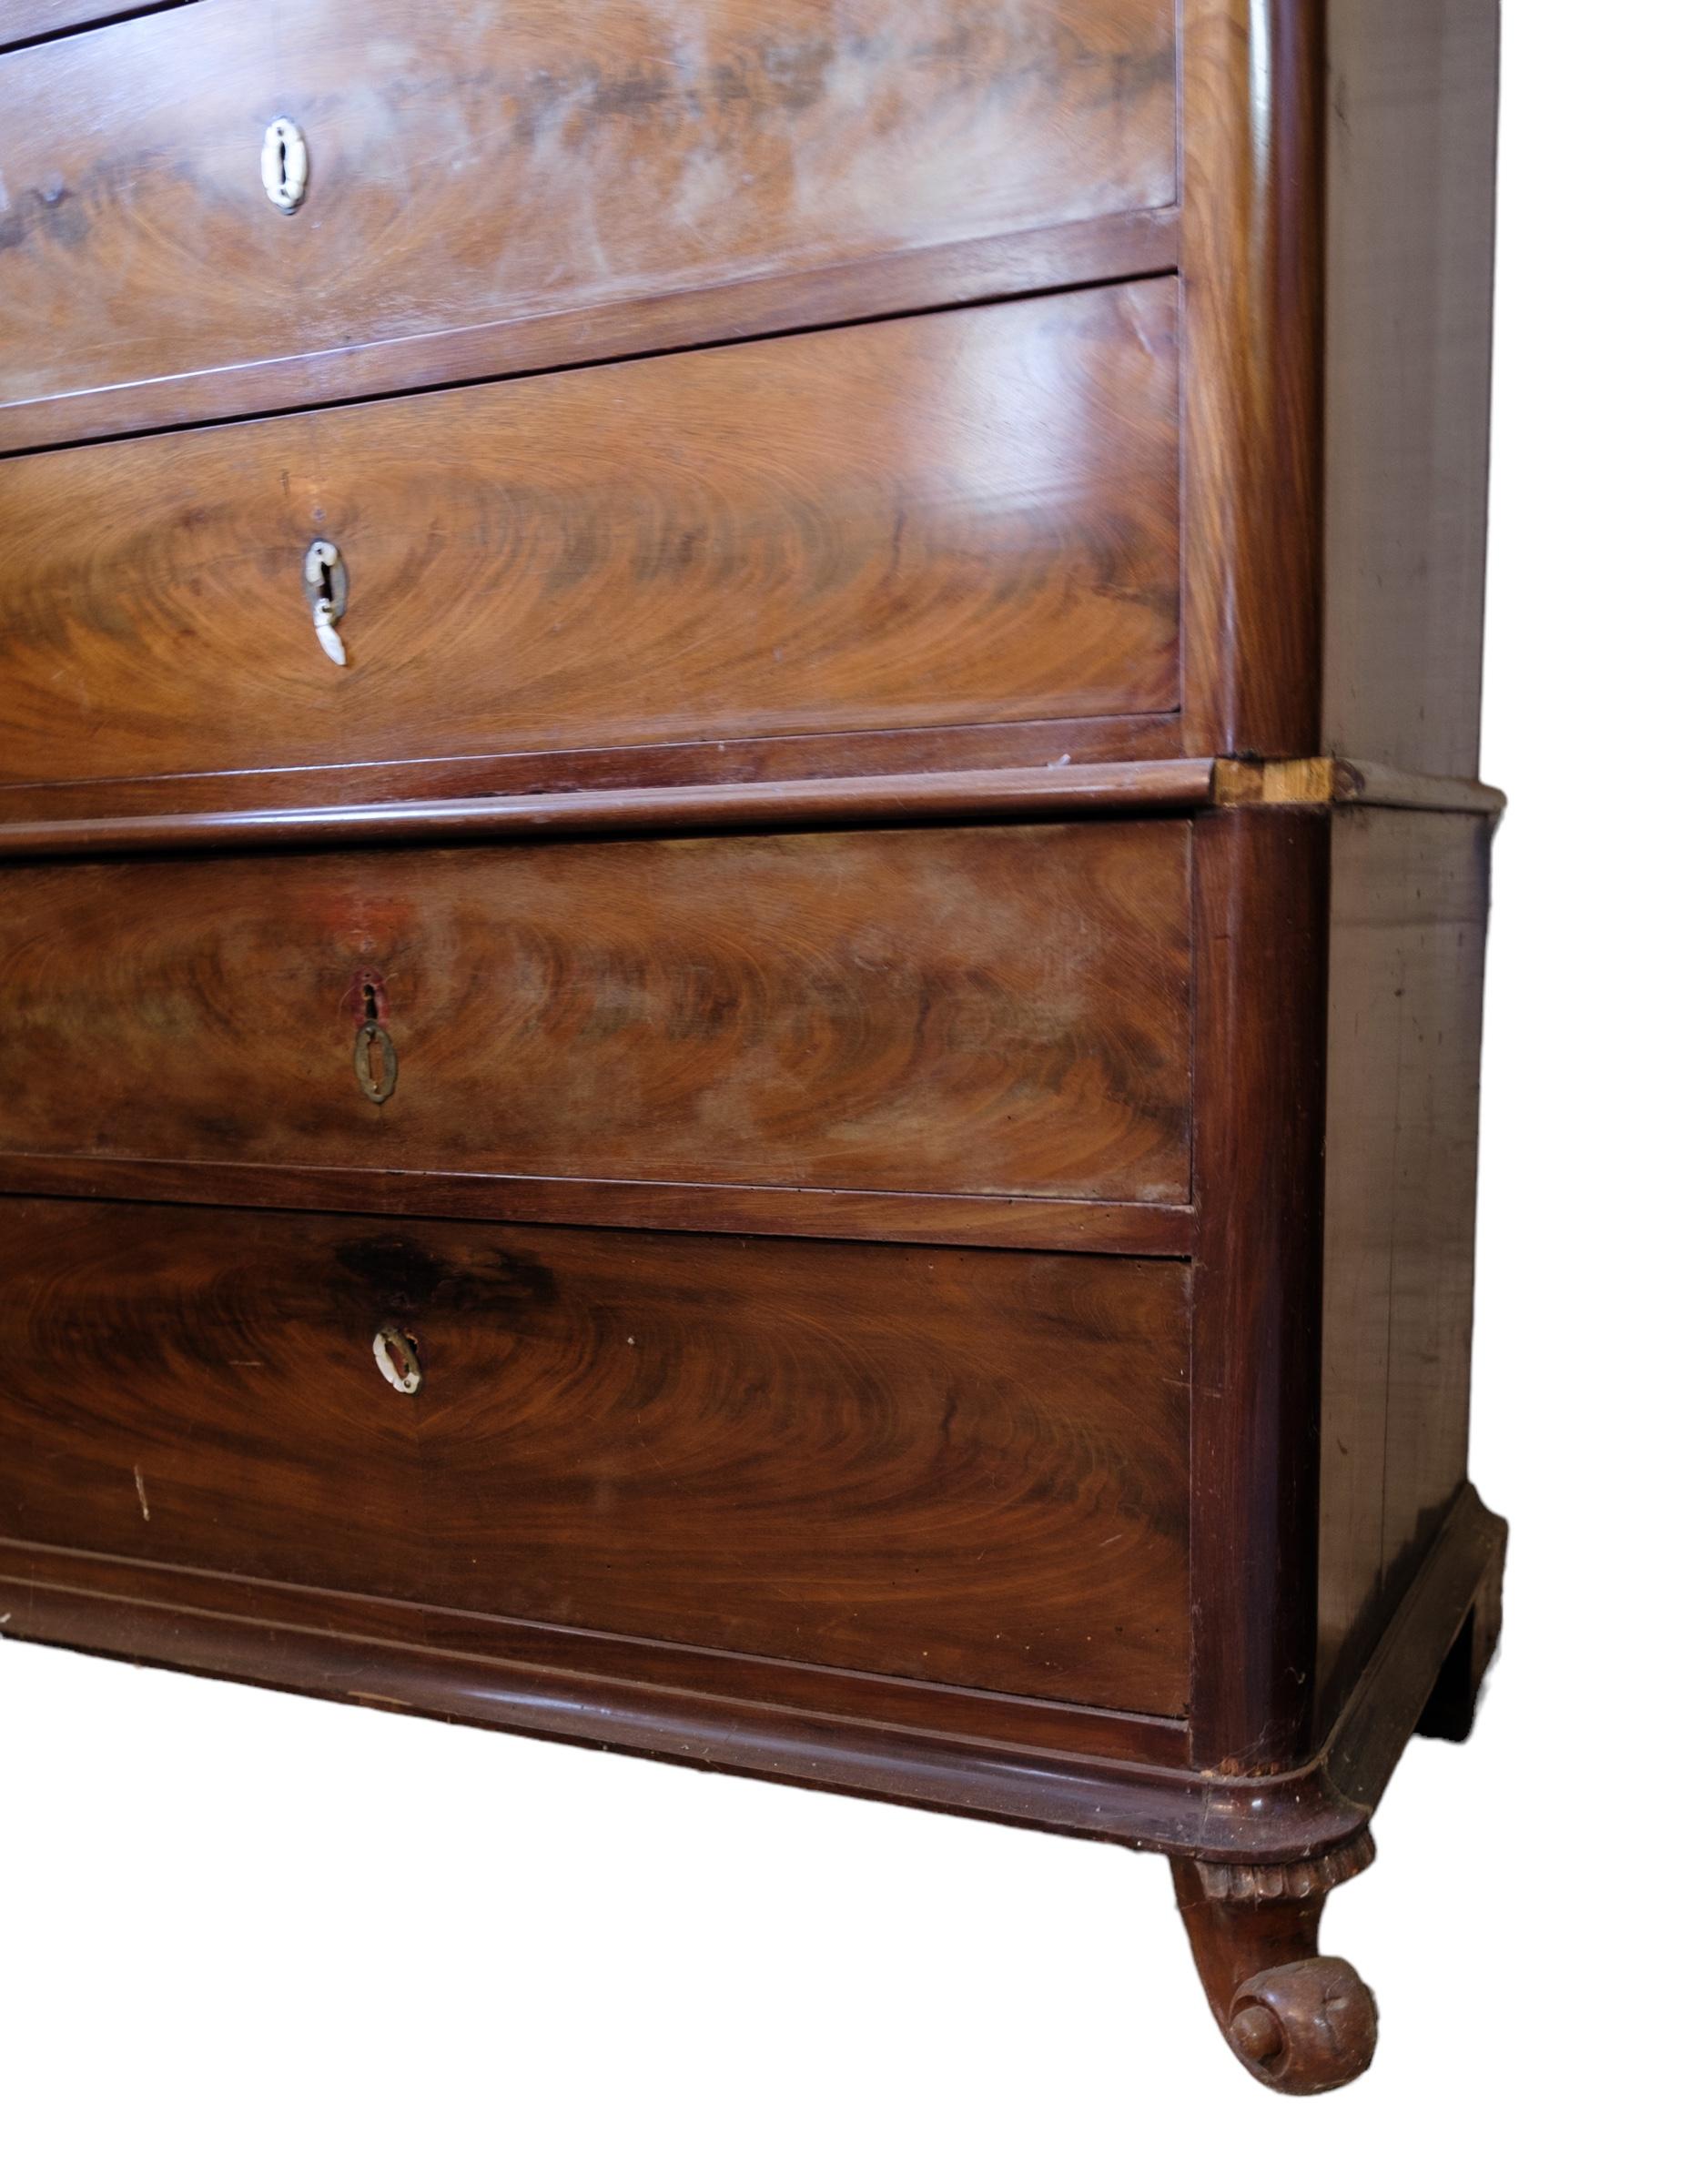 Danish High mahogany chest of drawers from around the 1840s For Sale